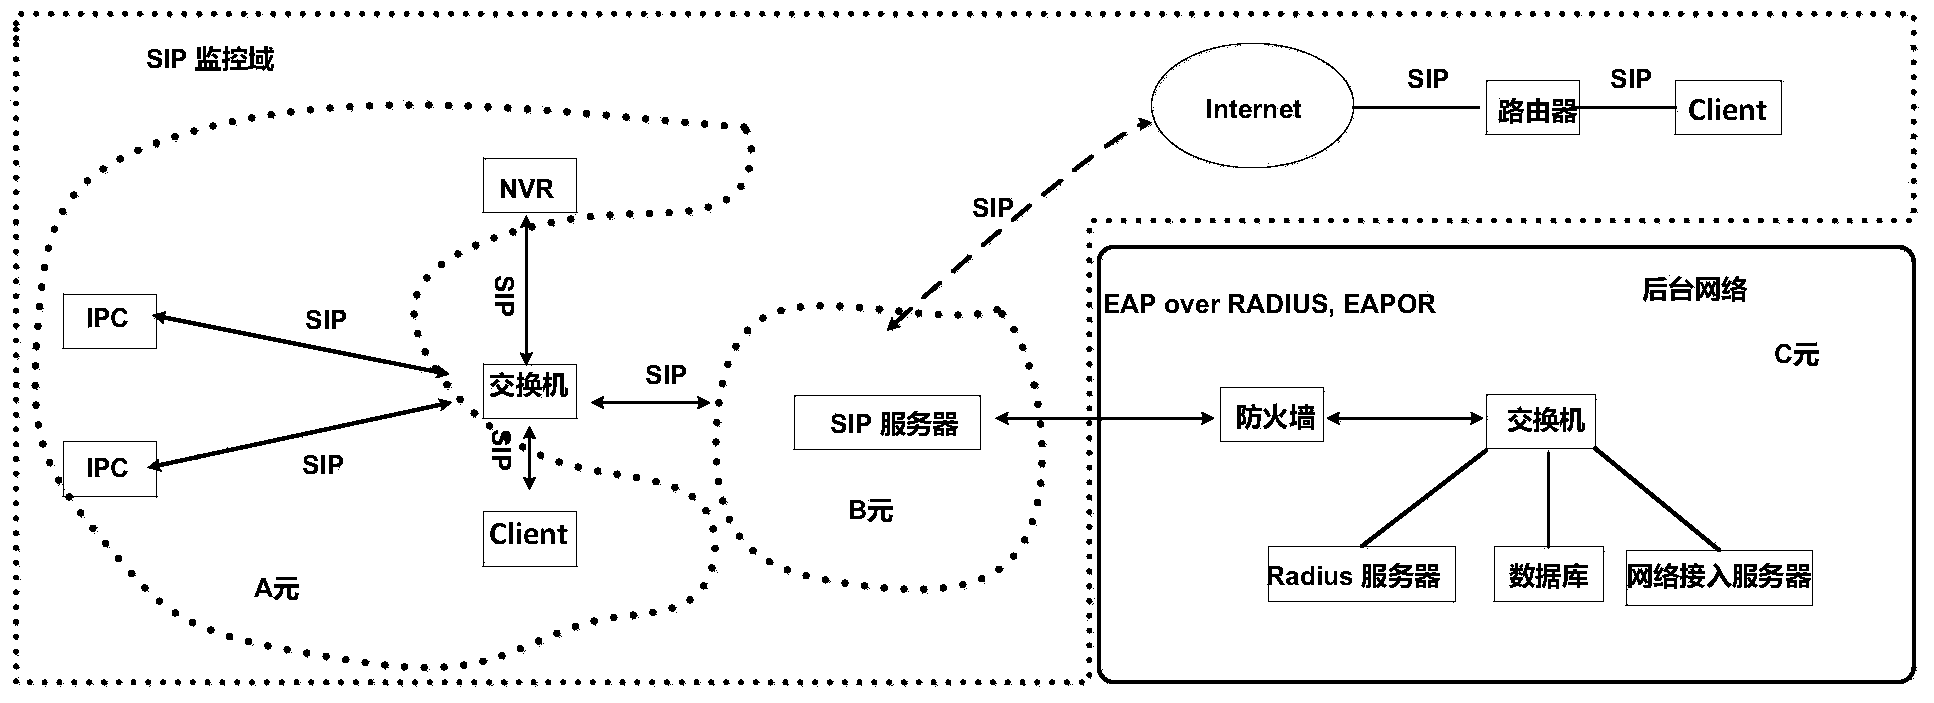 Identity authentication method for accessing SIP security video monitoring system